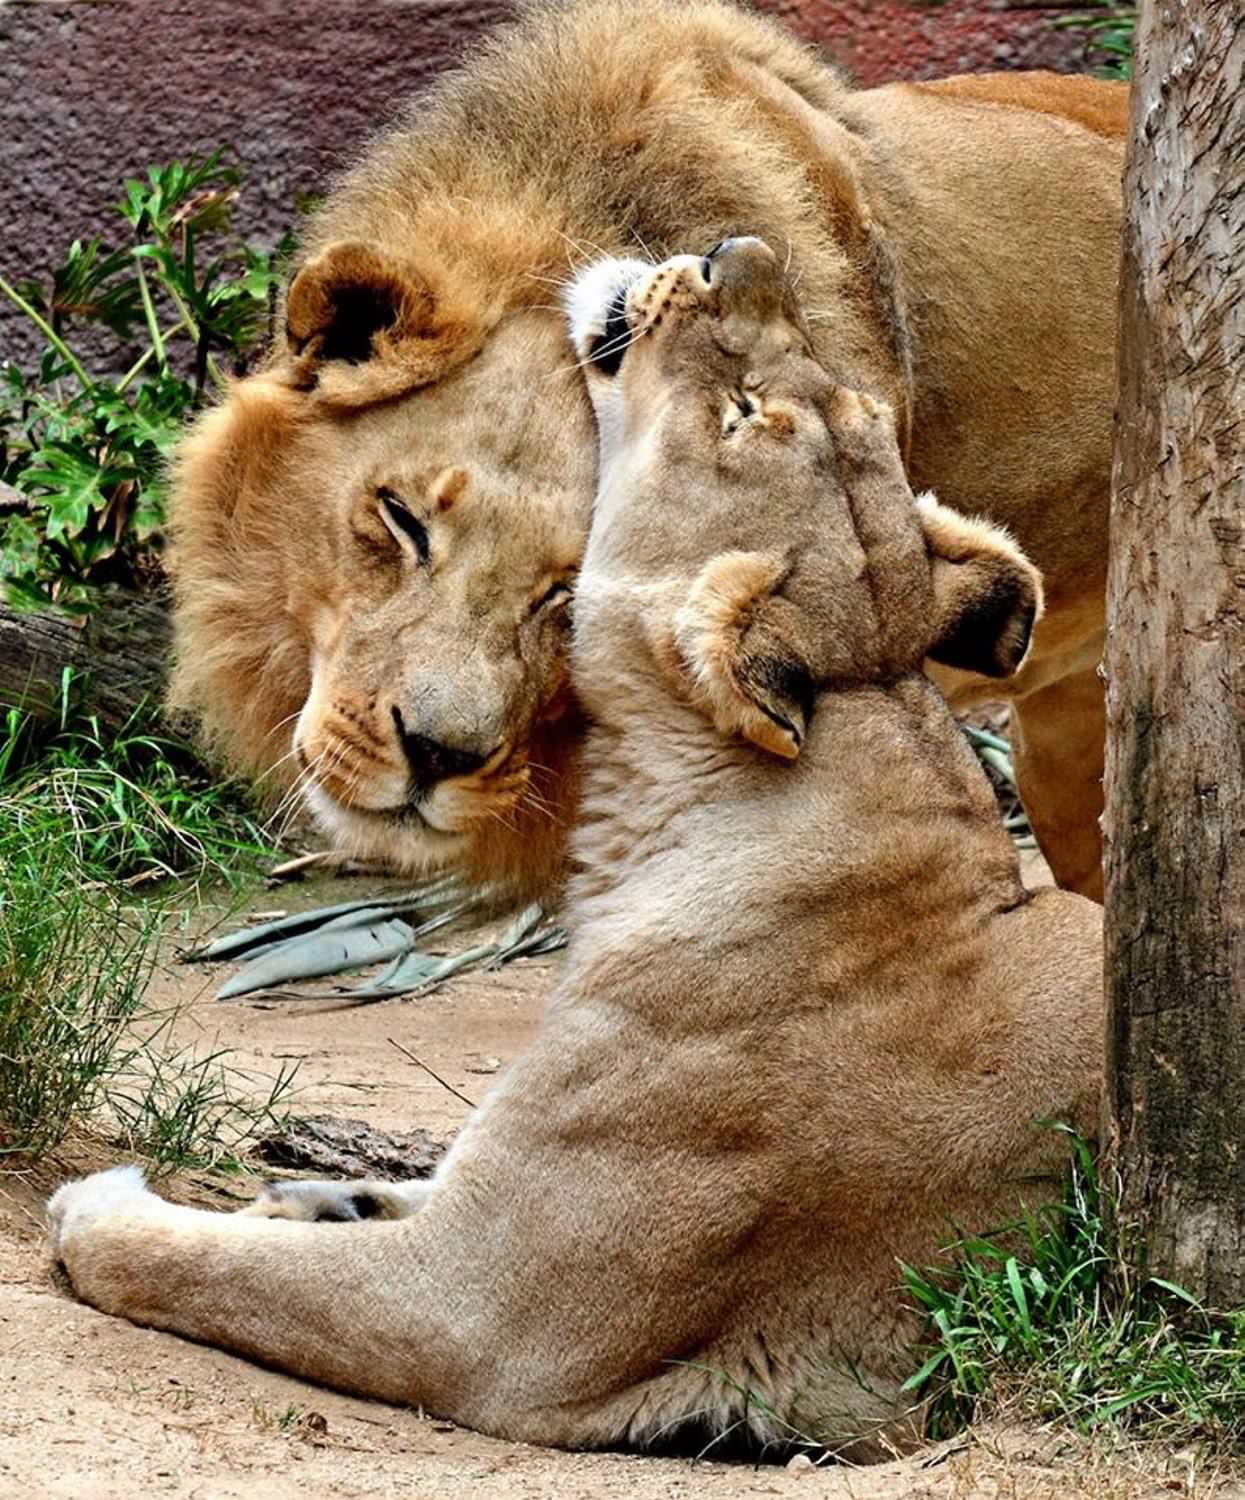 A pair of African lions at the Los Angeles Zoo / Hubert and Kalisa